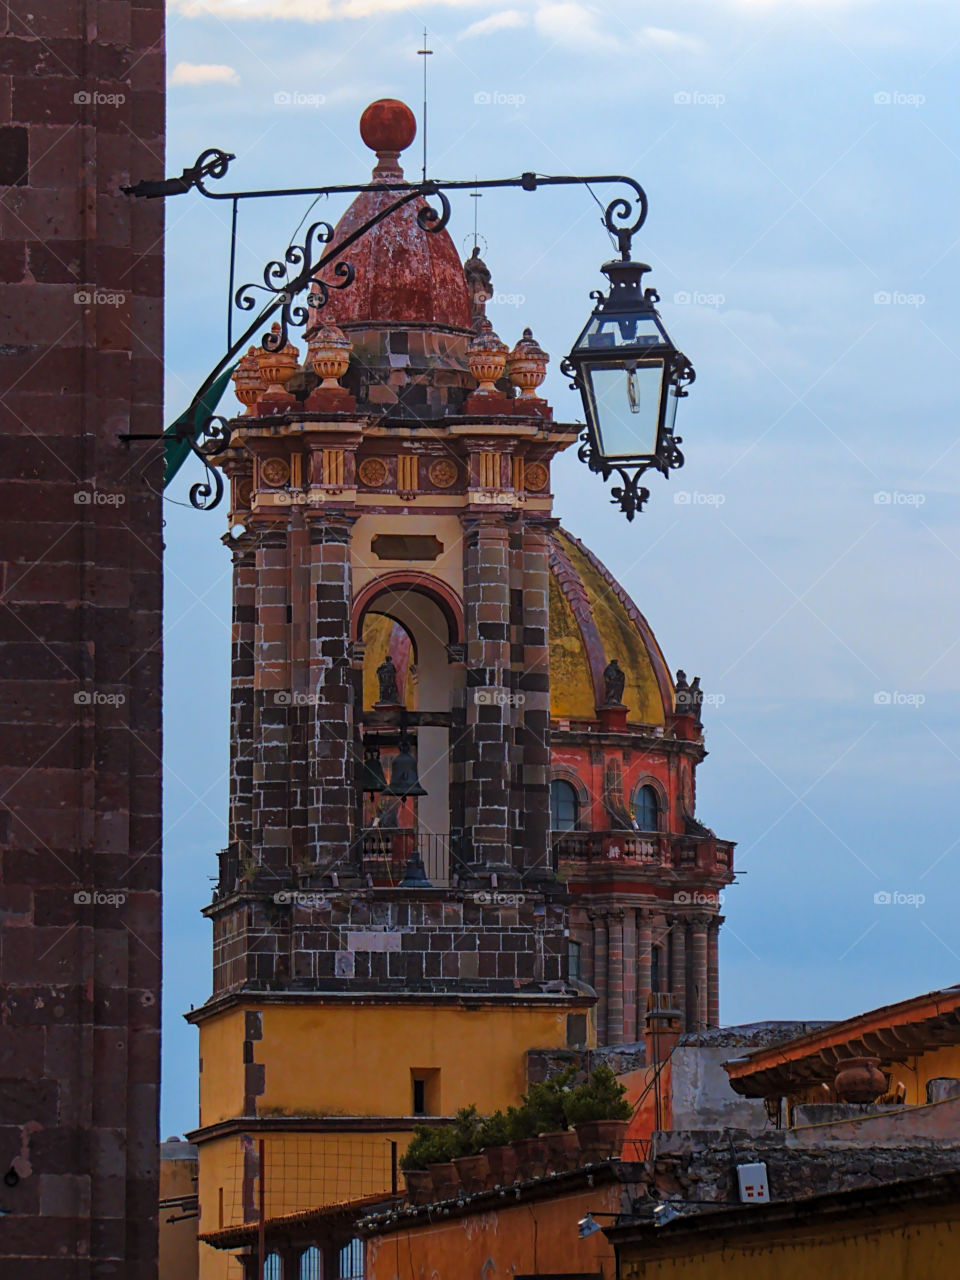 View of "Templo de las Monjas" during the golden hour from the main town square in San Miguel de Allende, Guanajuato, Mexico